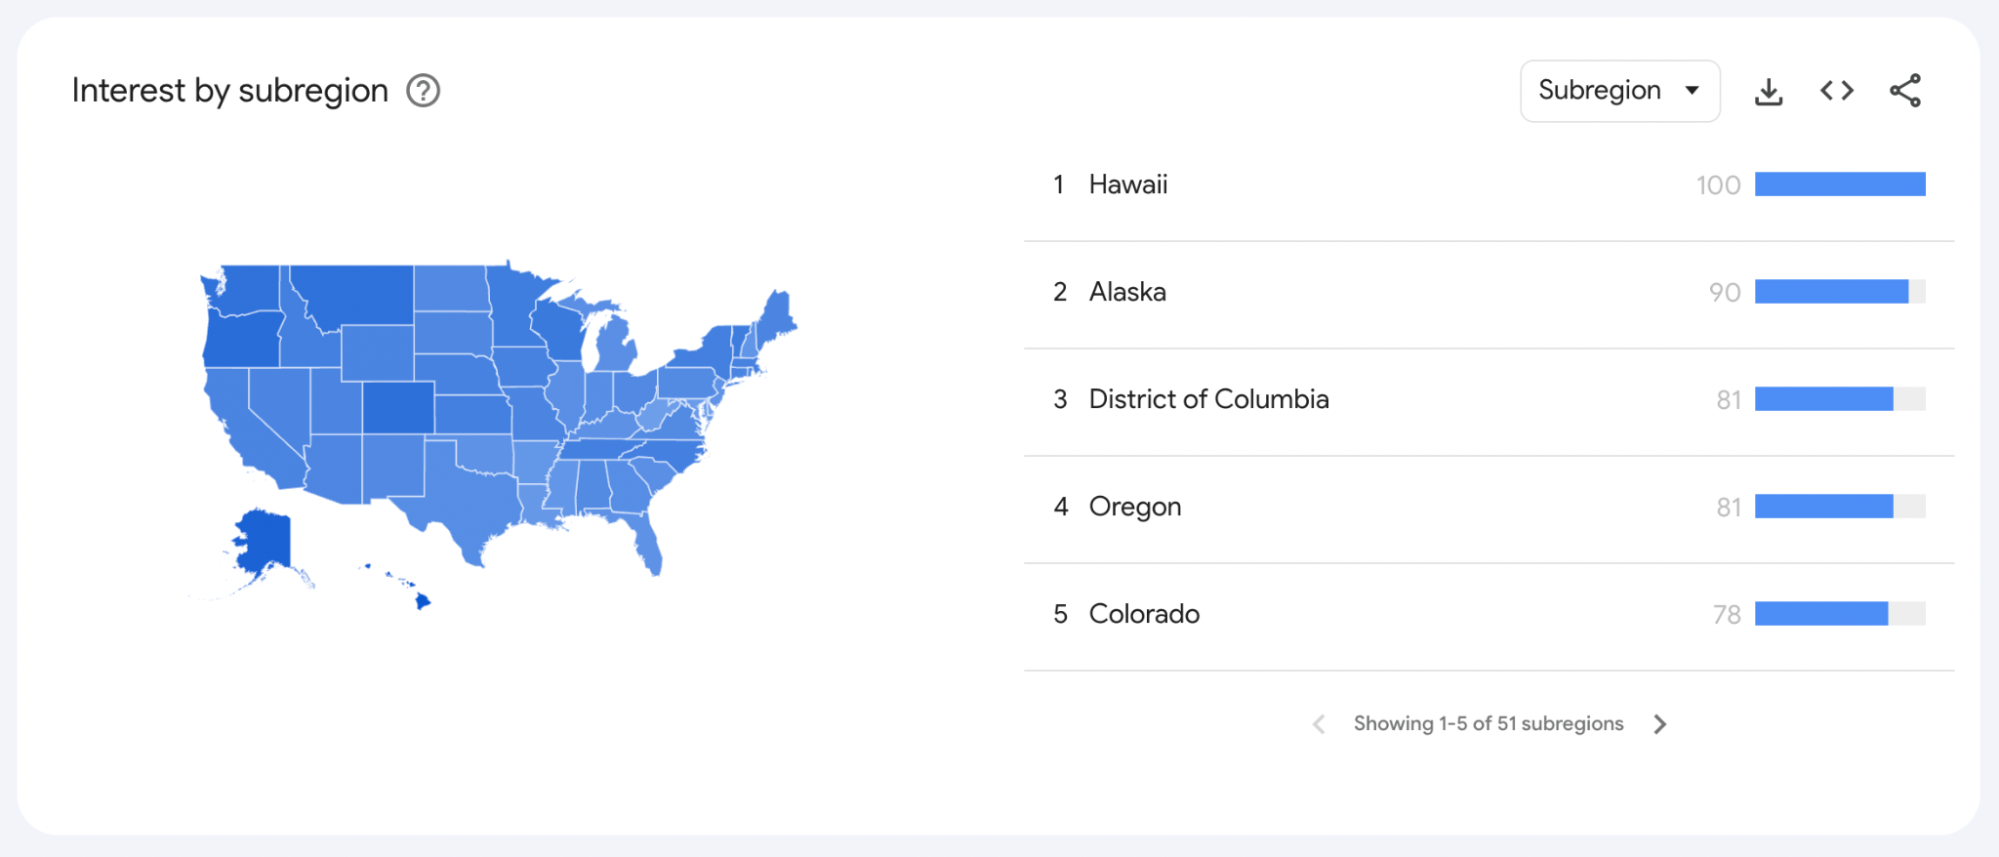 Google Trends interest by subregion in the US for the phrase “coffee”.